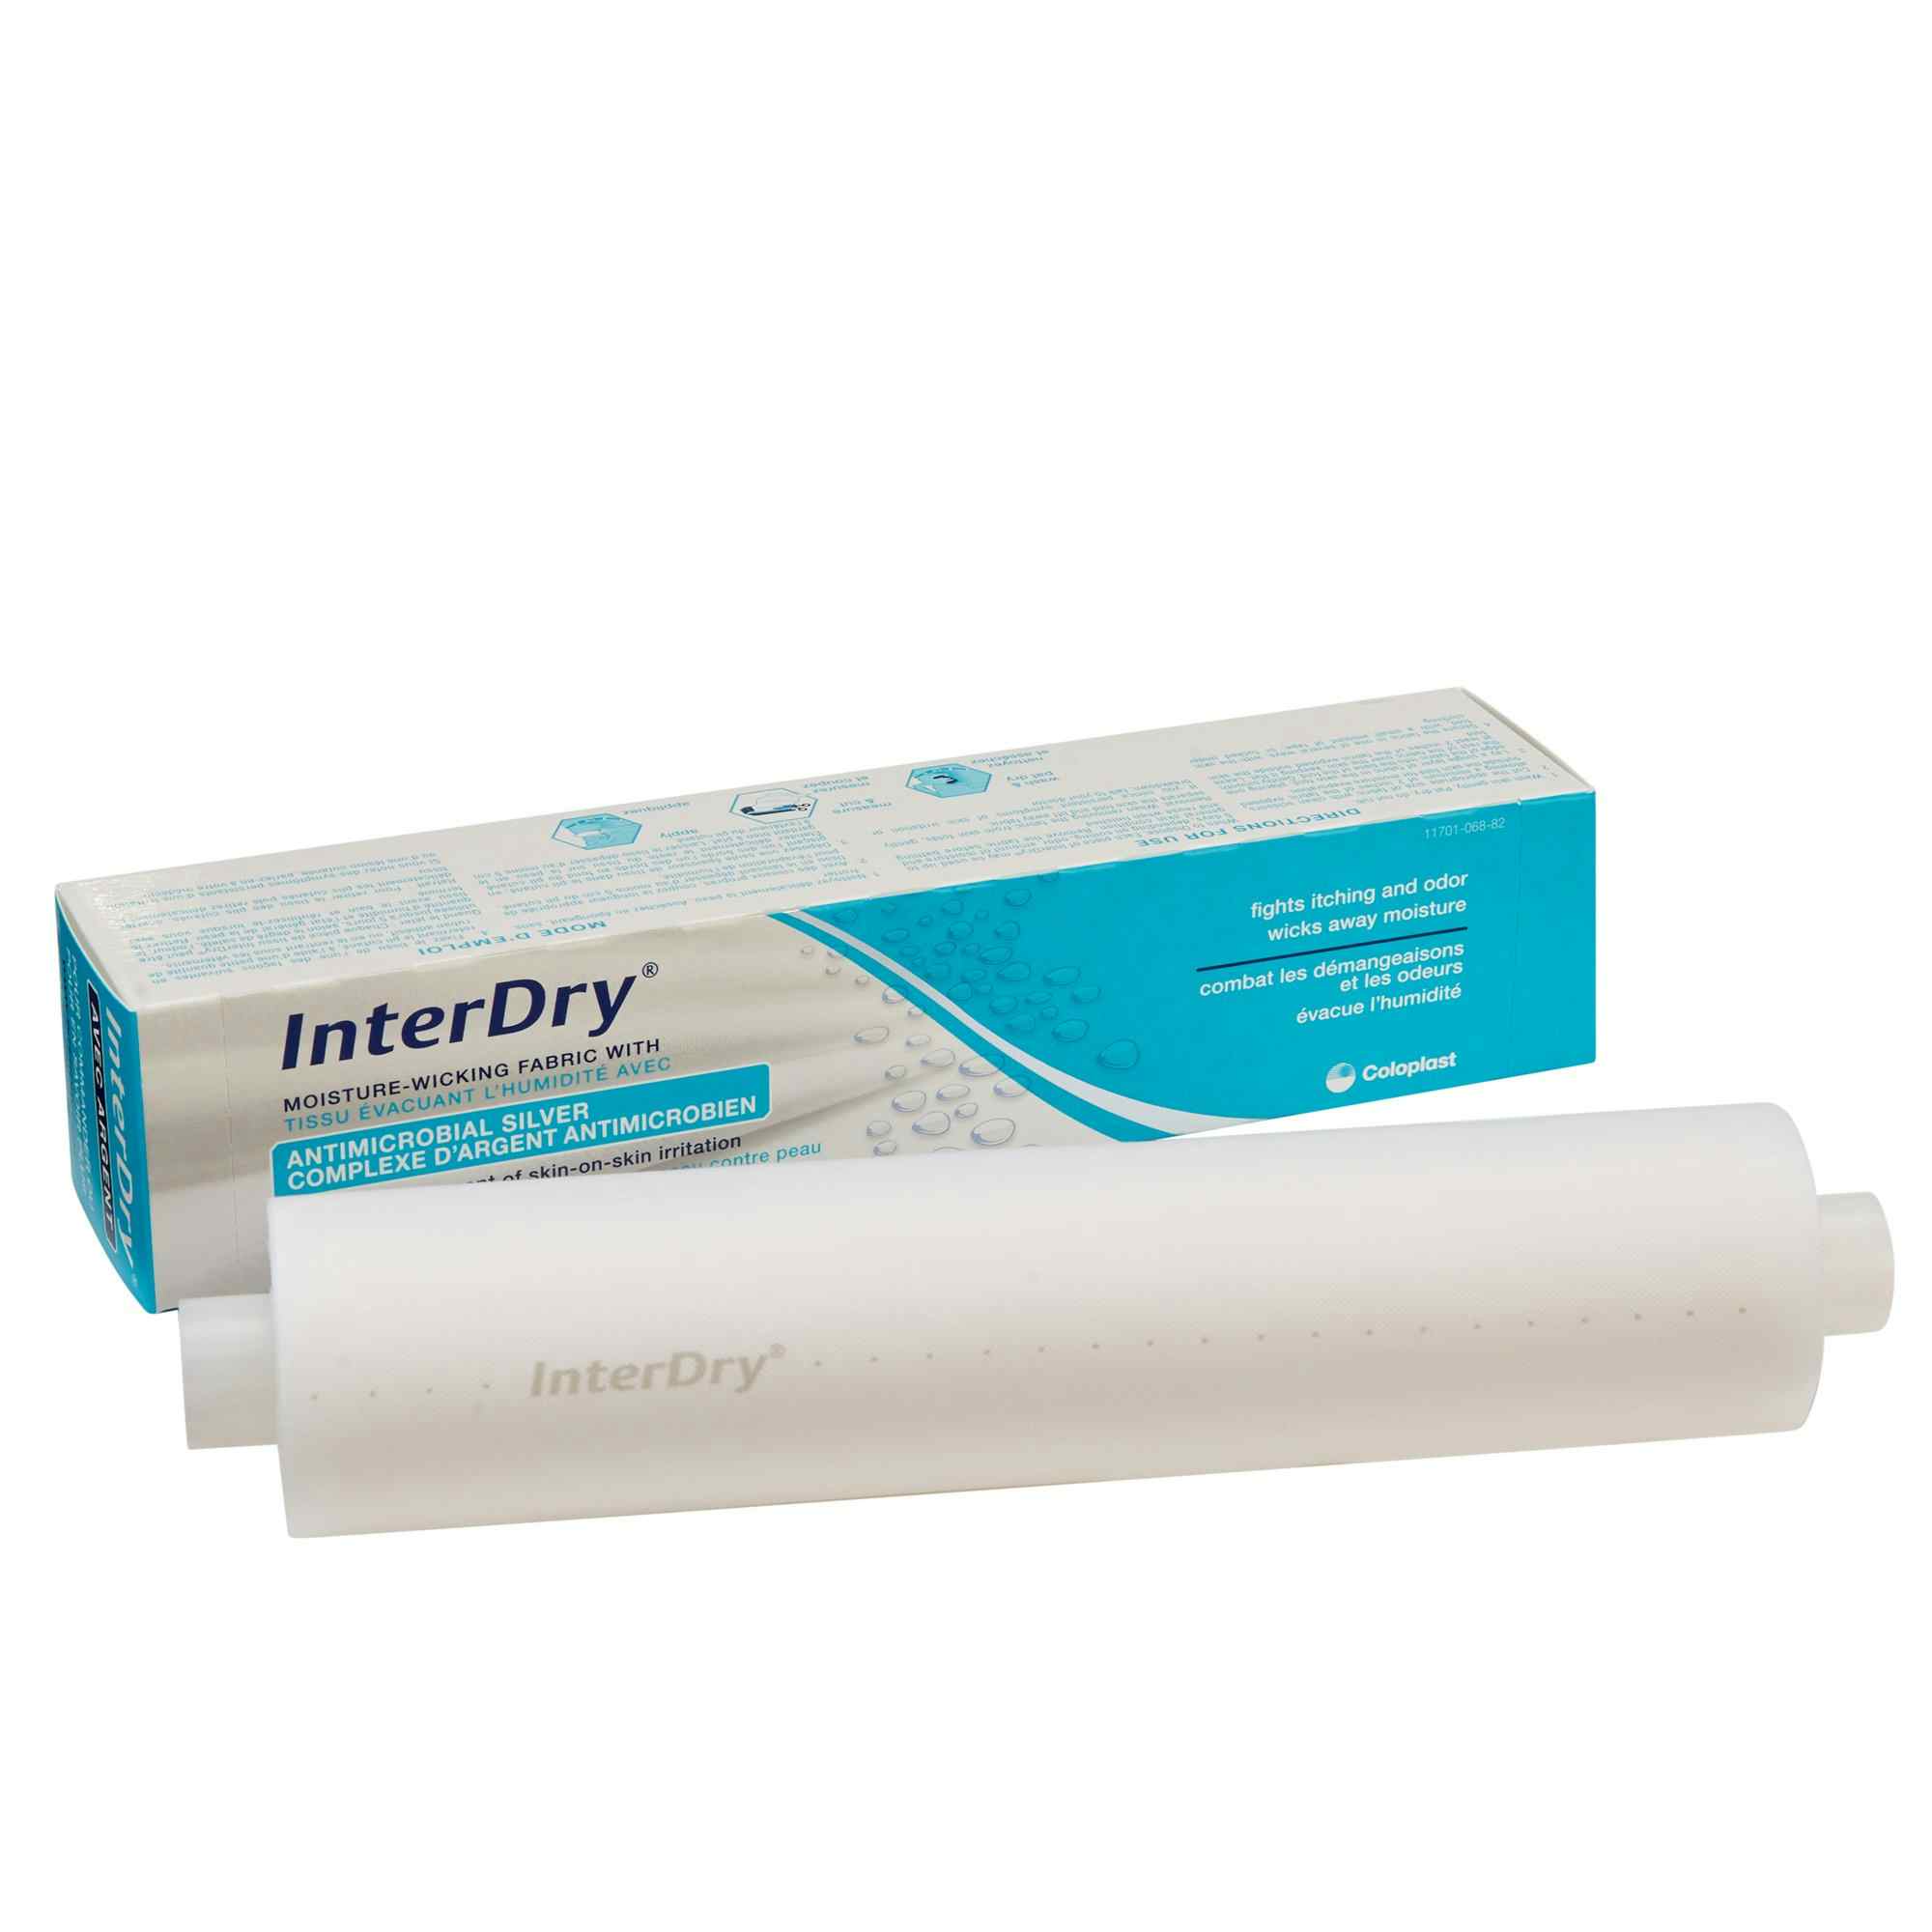 Coloplast InterDry Moisture-Wicking Fabric with Antimicrobial Silver, 10 X 144", 7910, 1 Each